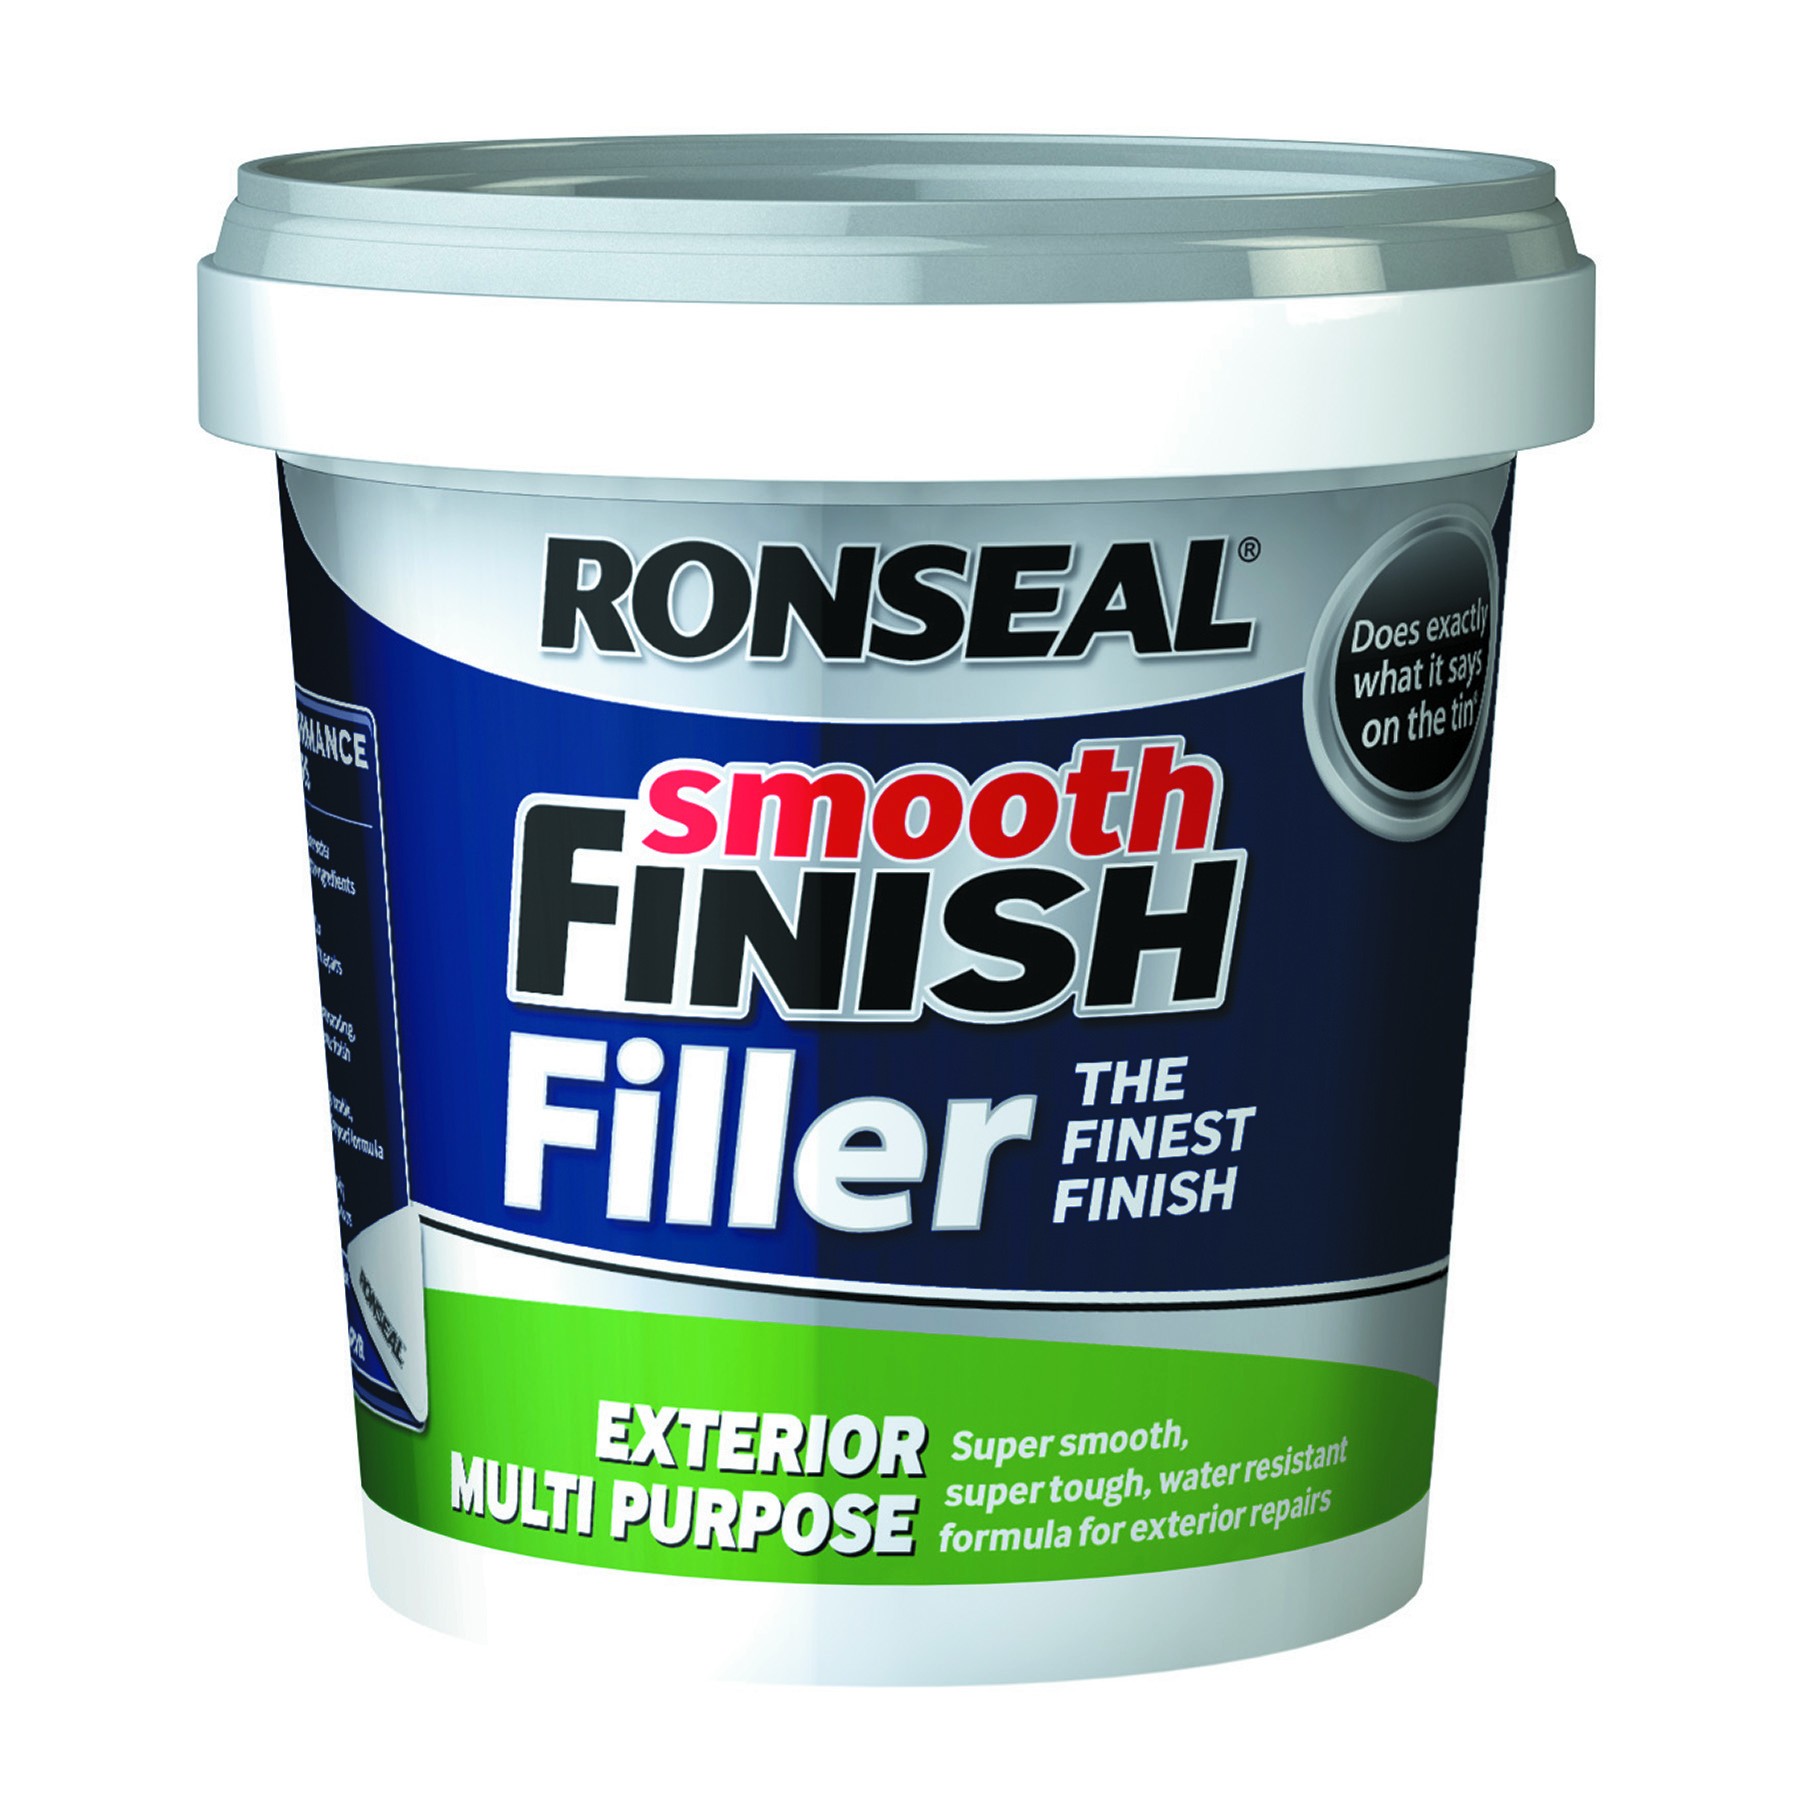 Ronseal Smooth Finish Exterior Wall Filler 1.2kg [RONS36562]